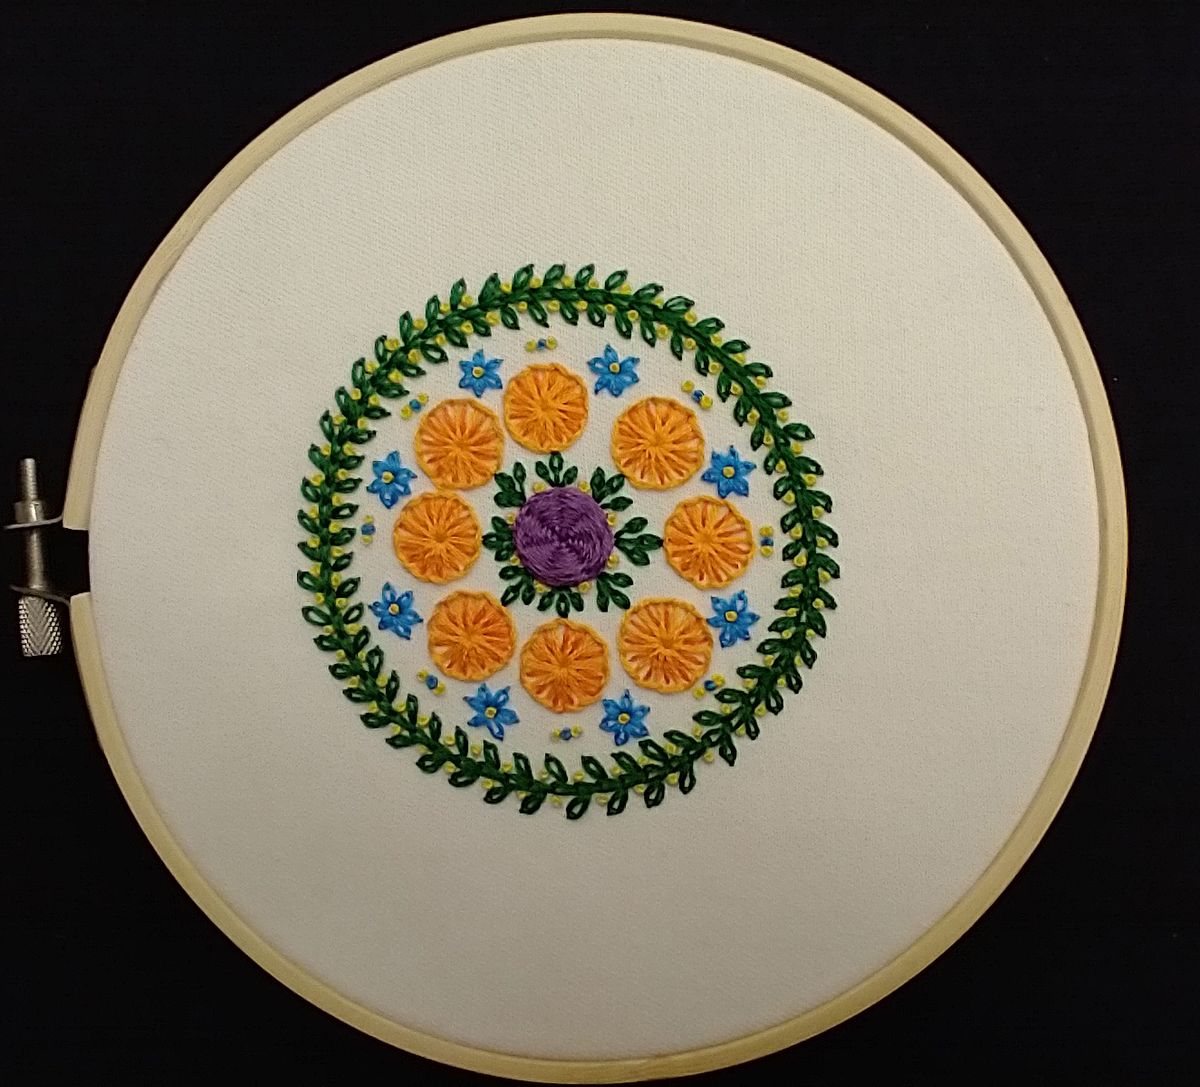 Introduction to Surface Embroidery: Flower Mandala with Laura Tandeske